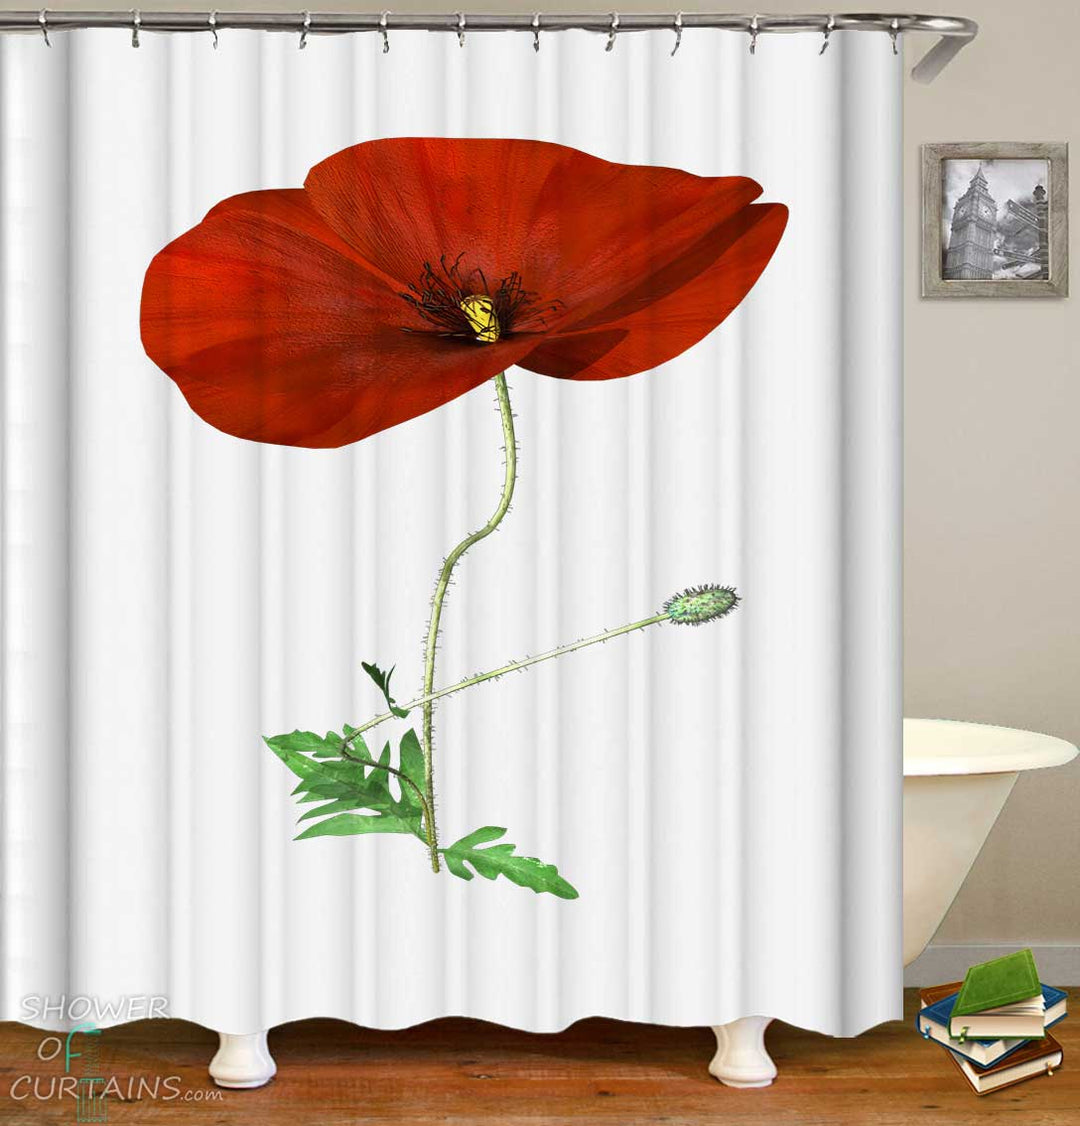 Shower Curtains with Single Poppy Flower